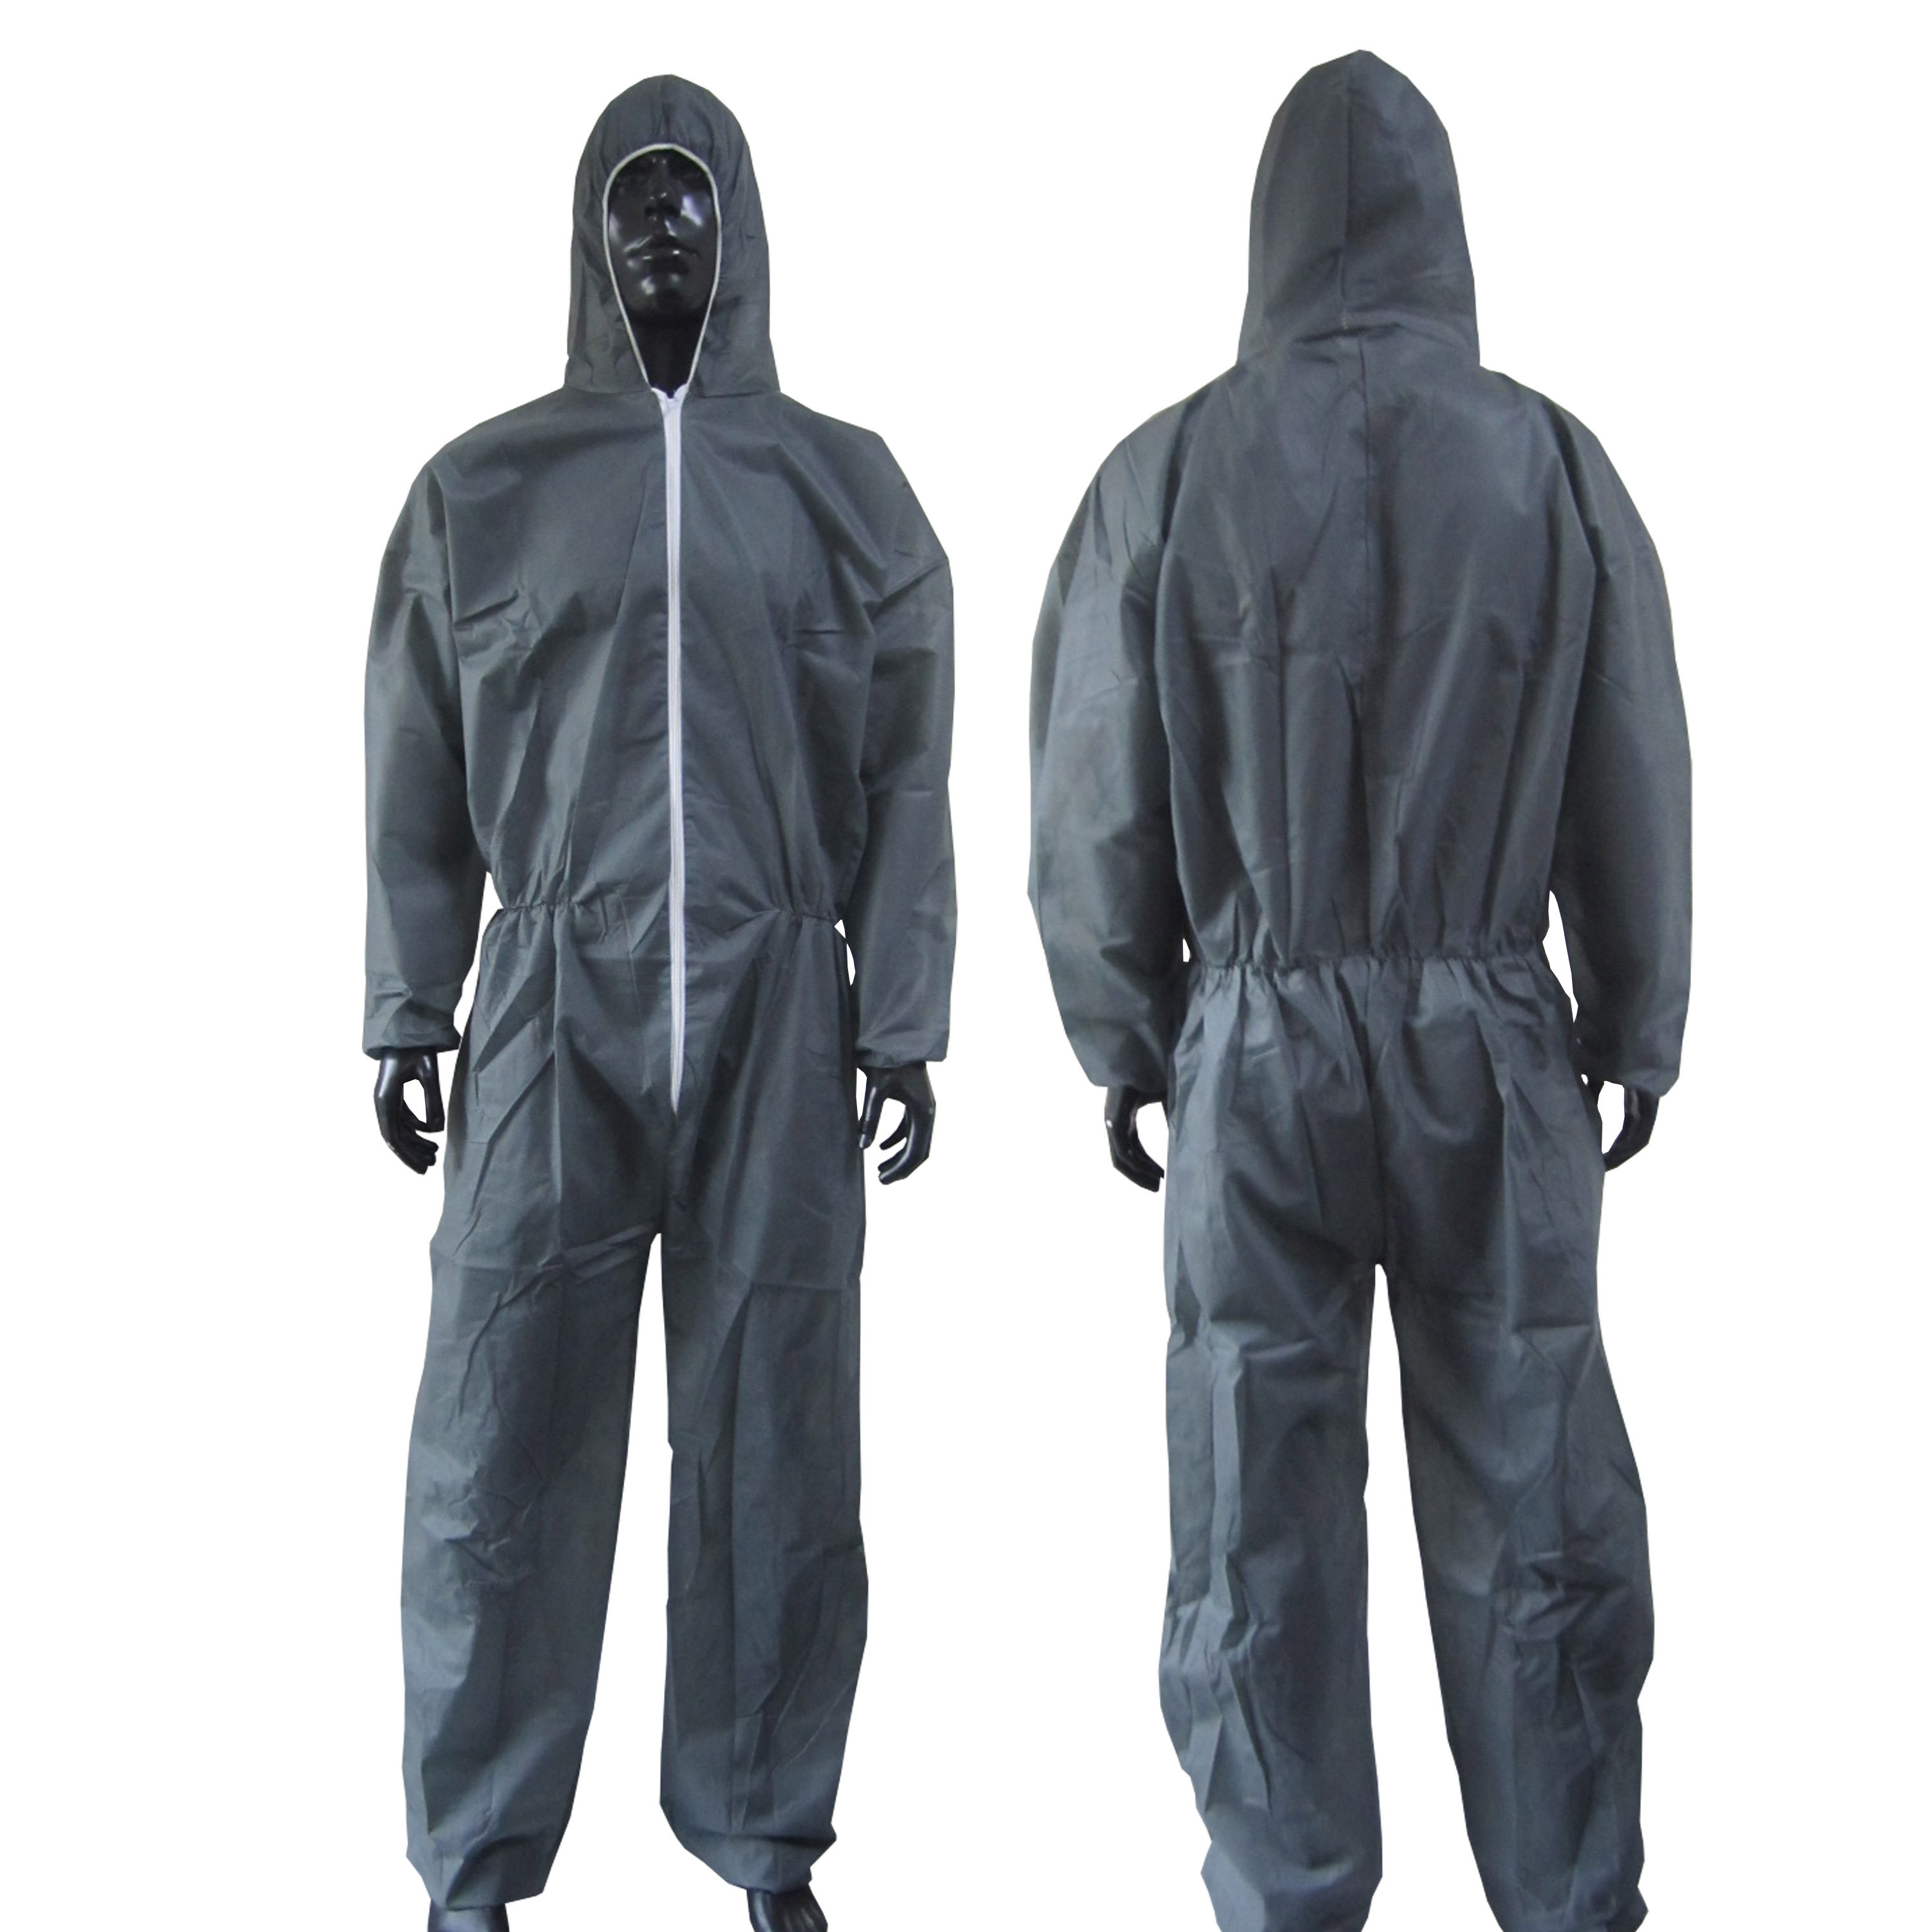 PP Non Woven Coverall with Hood